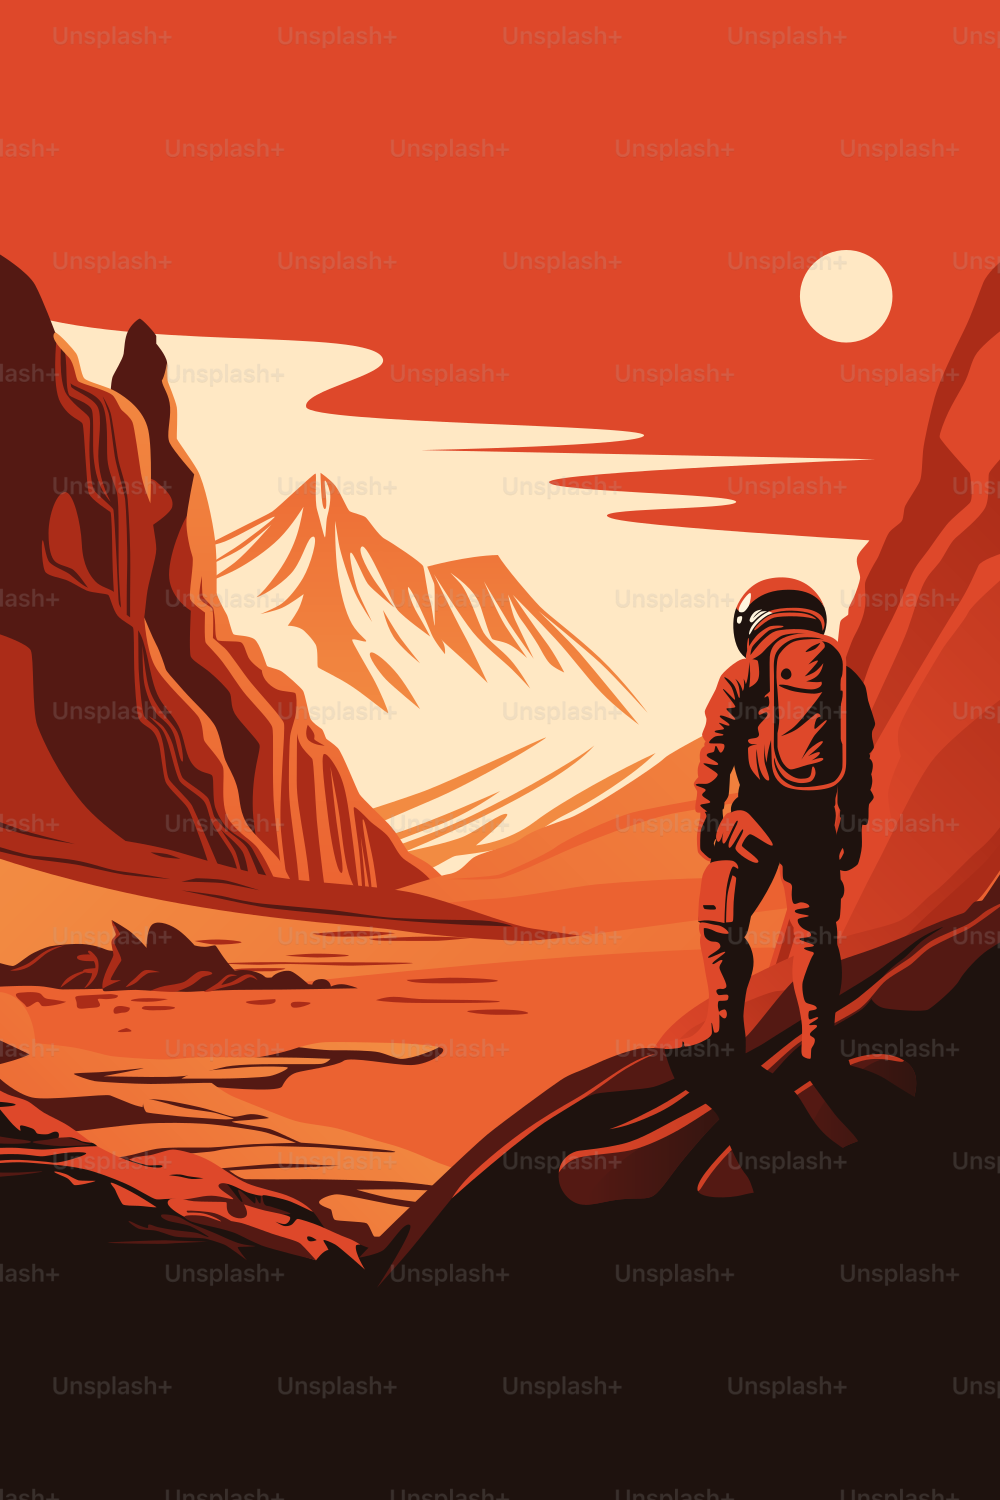 Mars Colonization Poster. Human Solar System Exploration. Astronaut on the Surface of the Red Planet, Looking at Its Landscape. Distant Sun in the Skies.